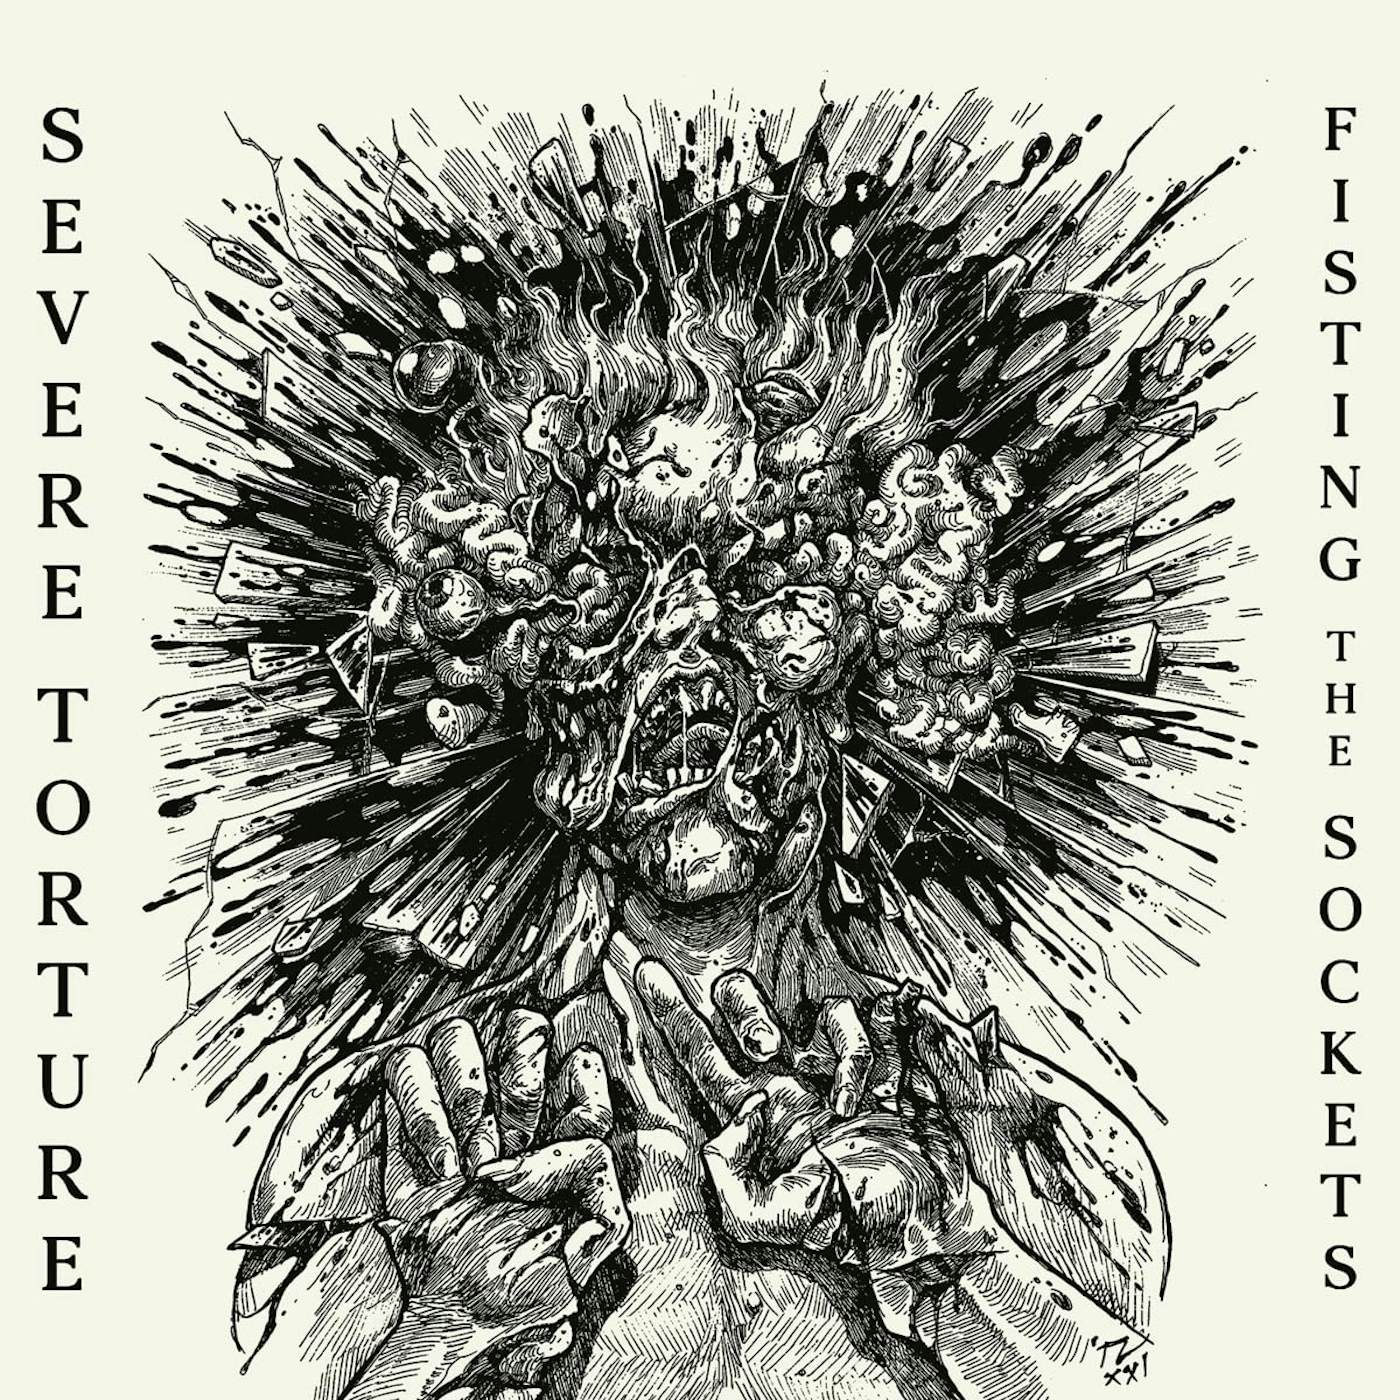 Severe Torture FISTING THE SOCKETS CD